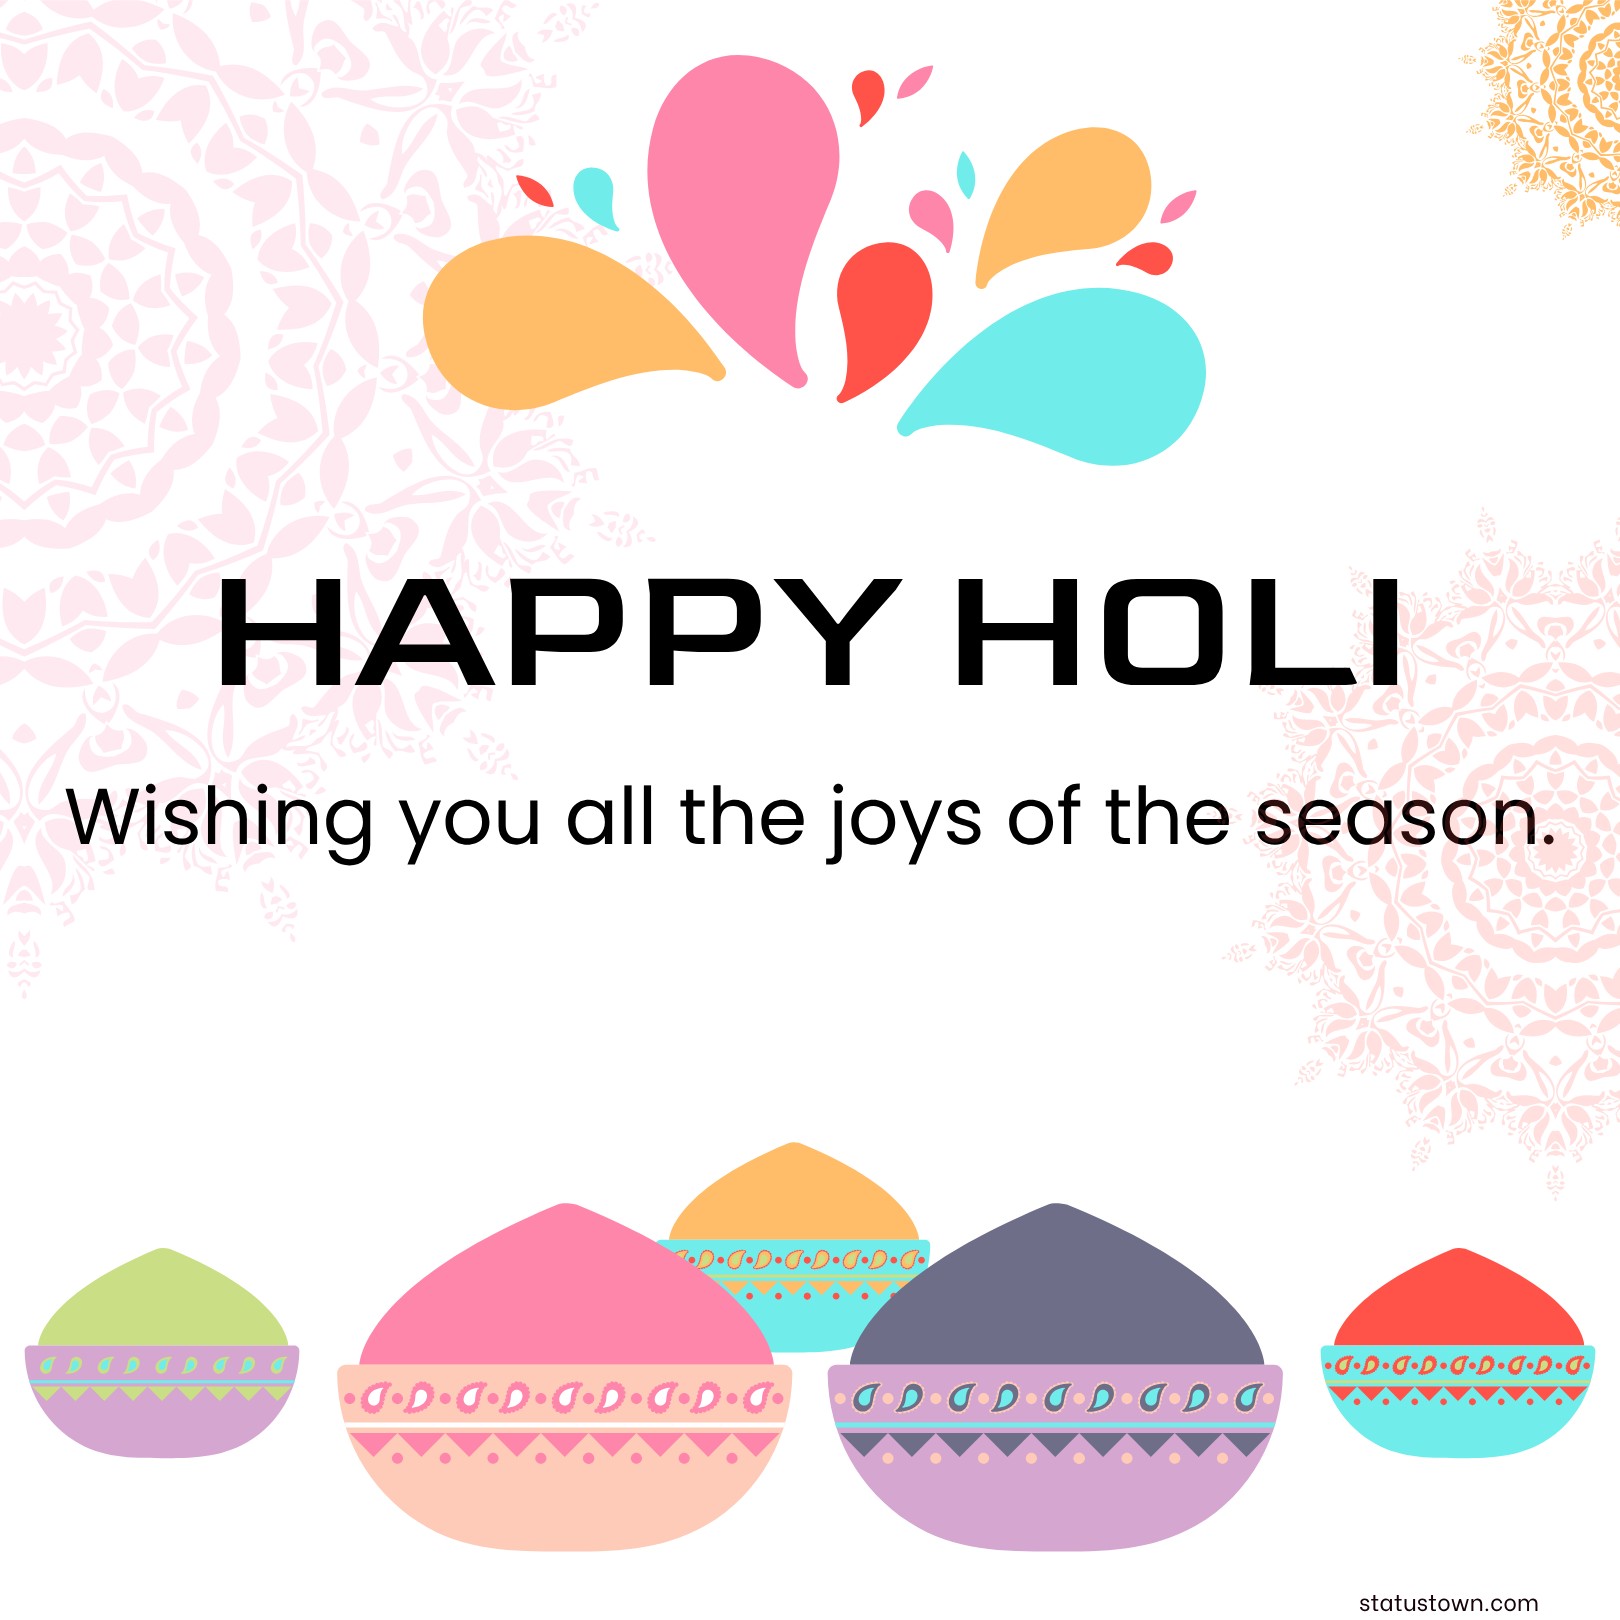 Happy Holi! Wishing you all the joys of the season. - Holi Wishes wishes, messages, and status